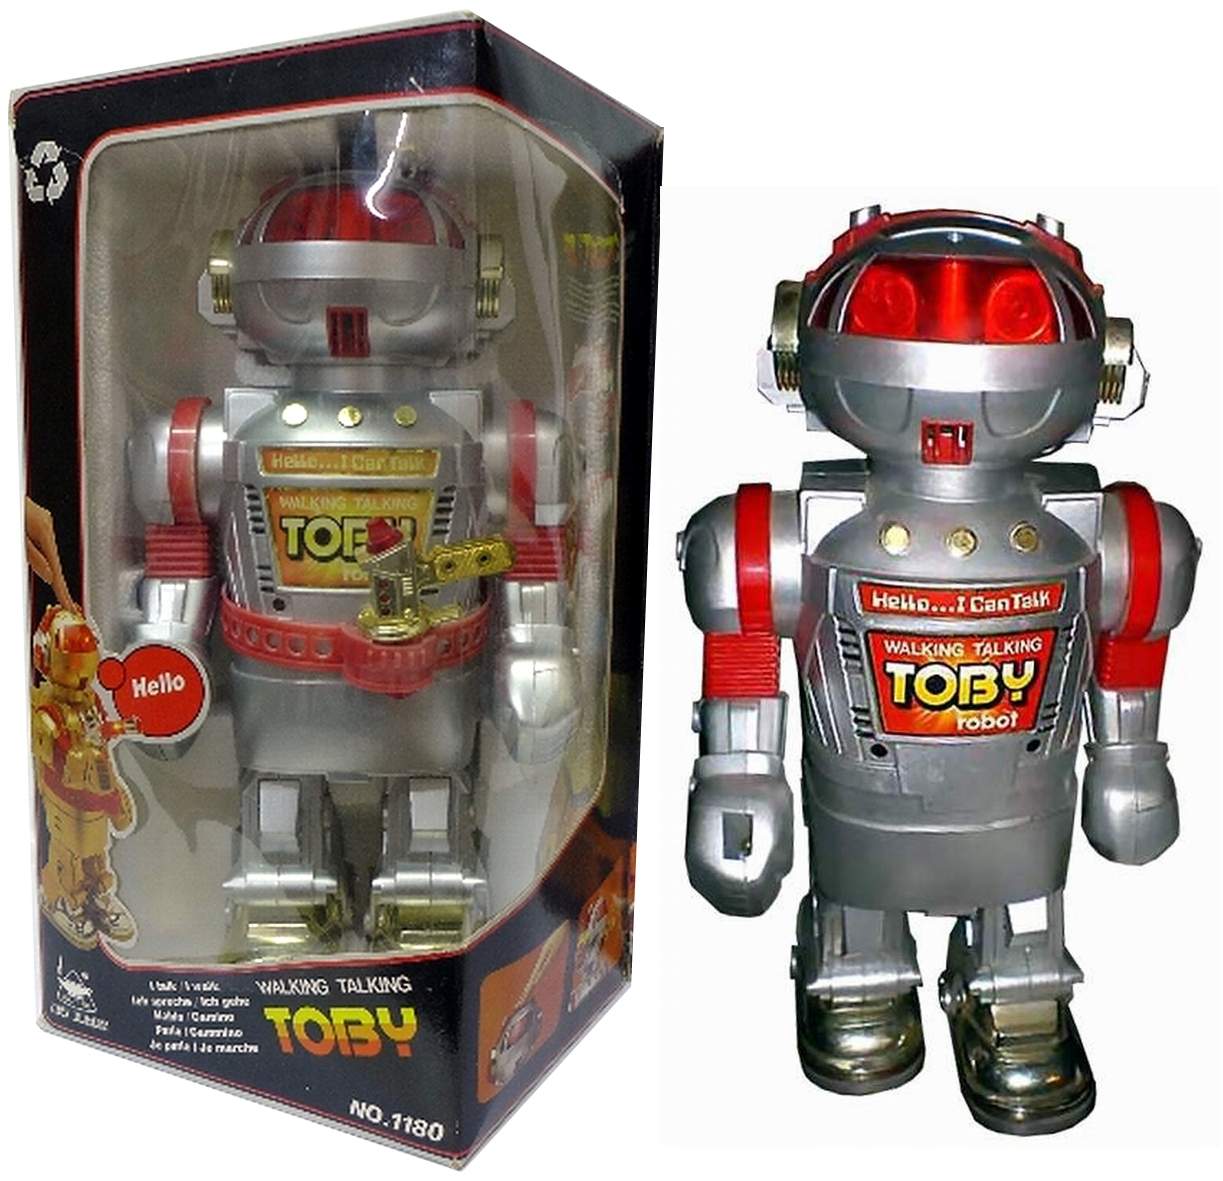 Toby Robot by New Bright